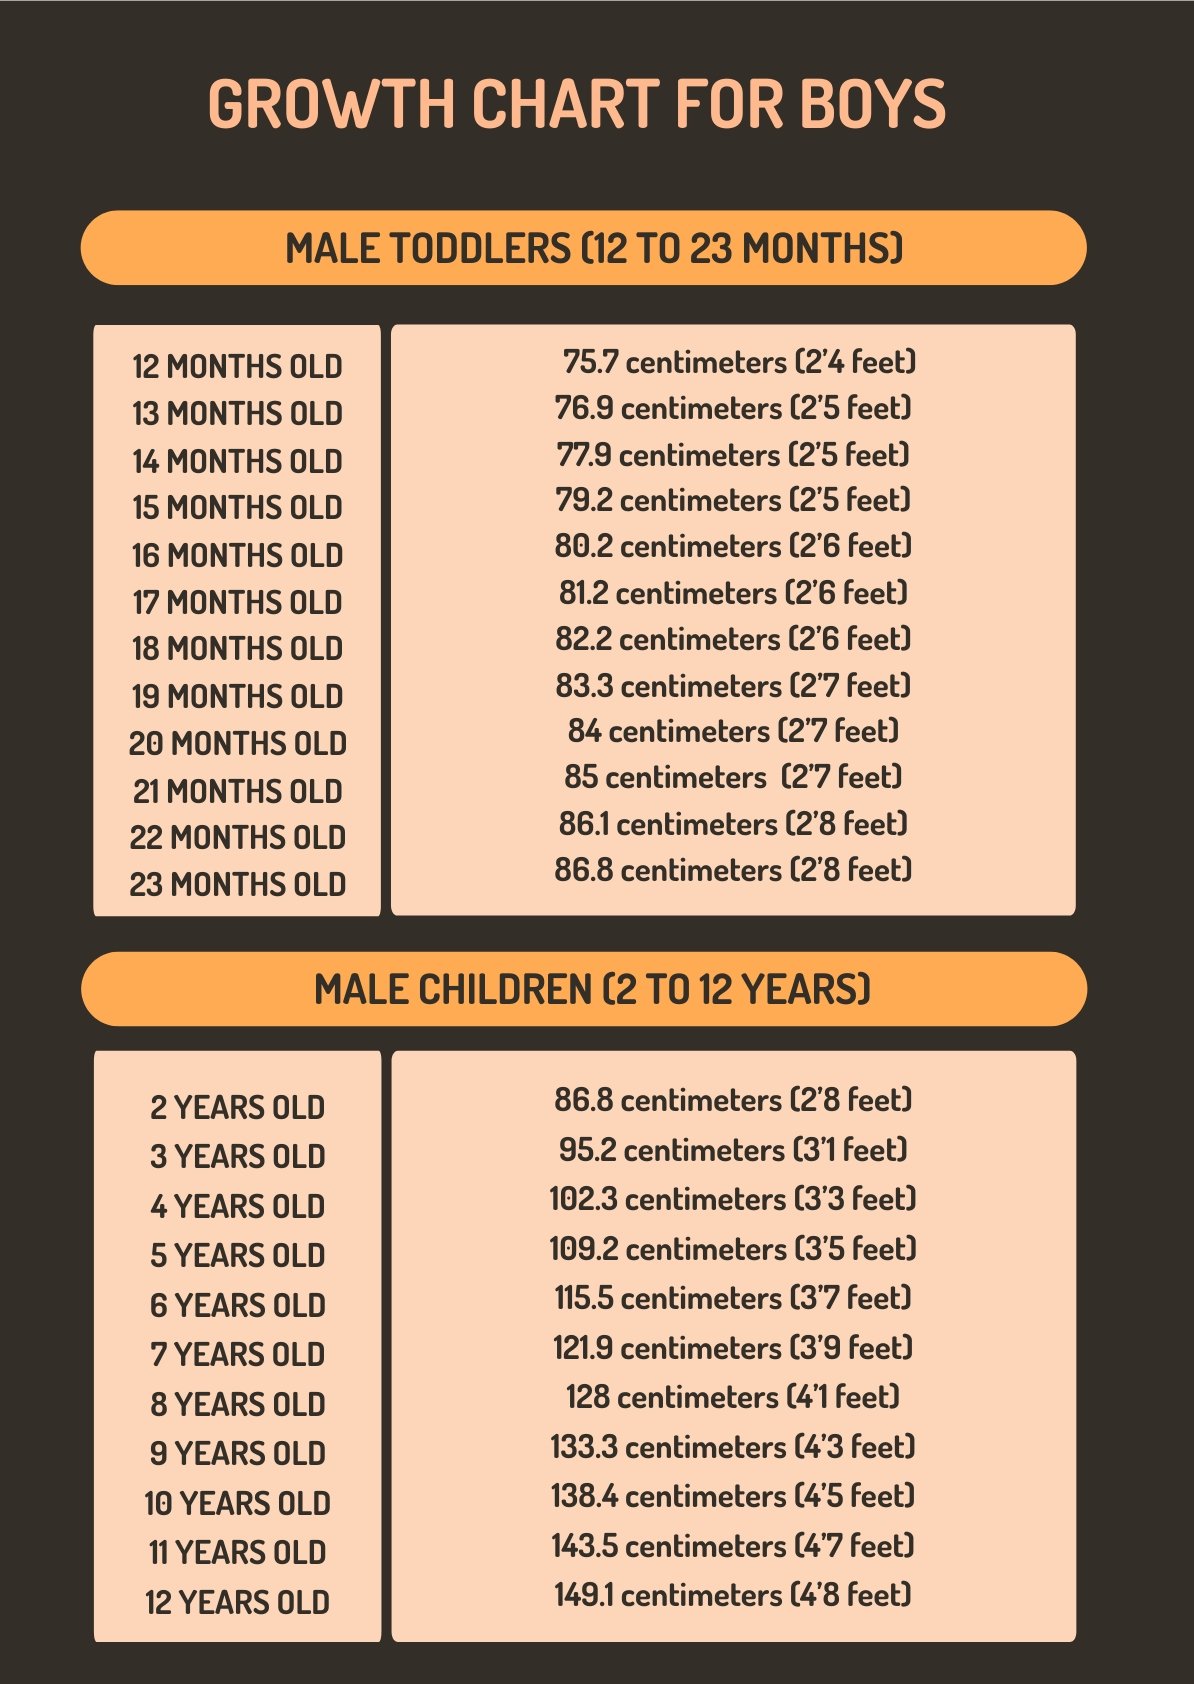 Free Growth Chart For Boys in PDF, Illustrator